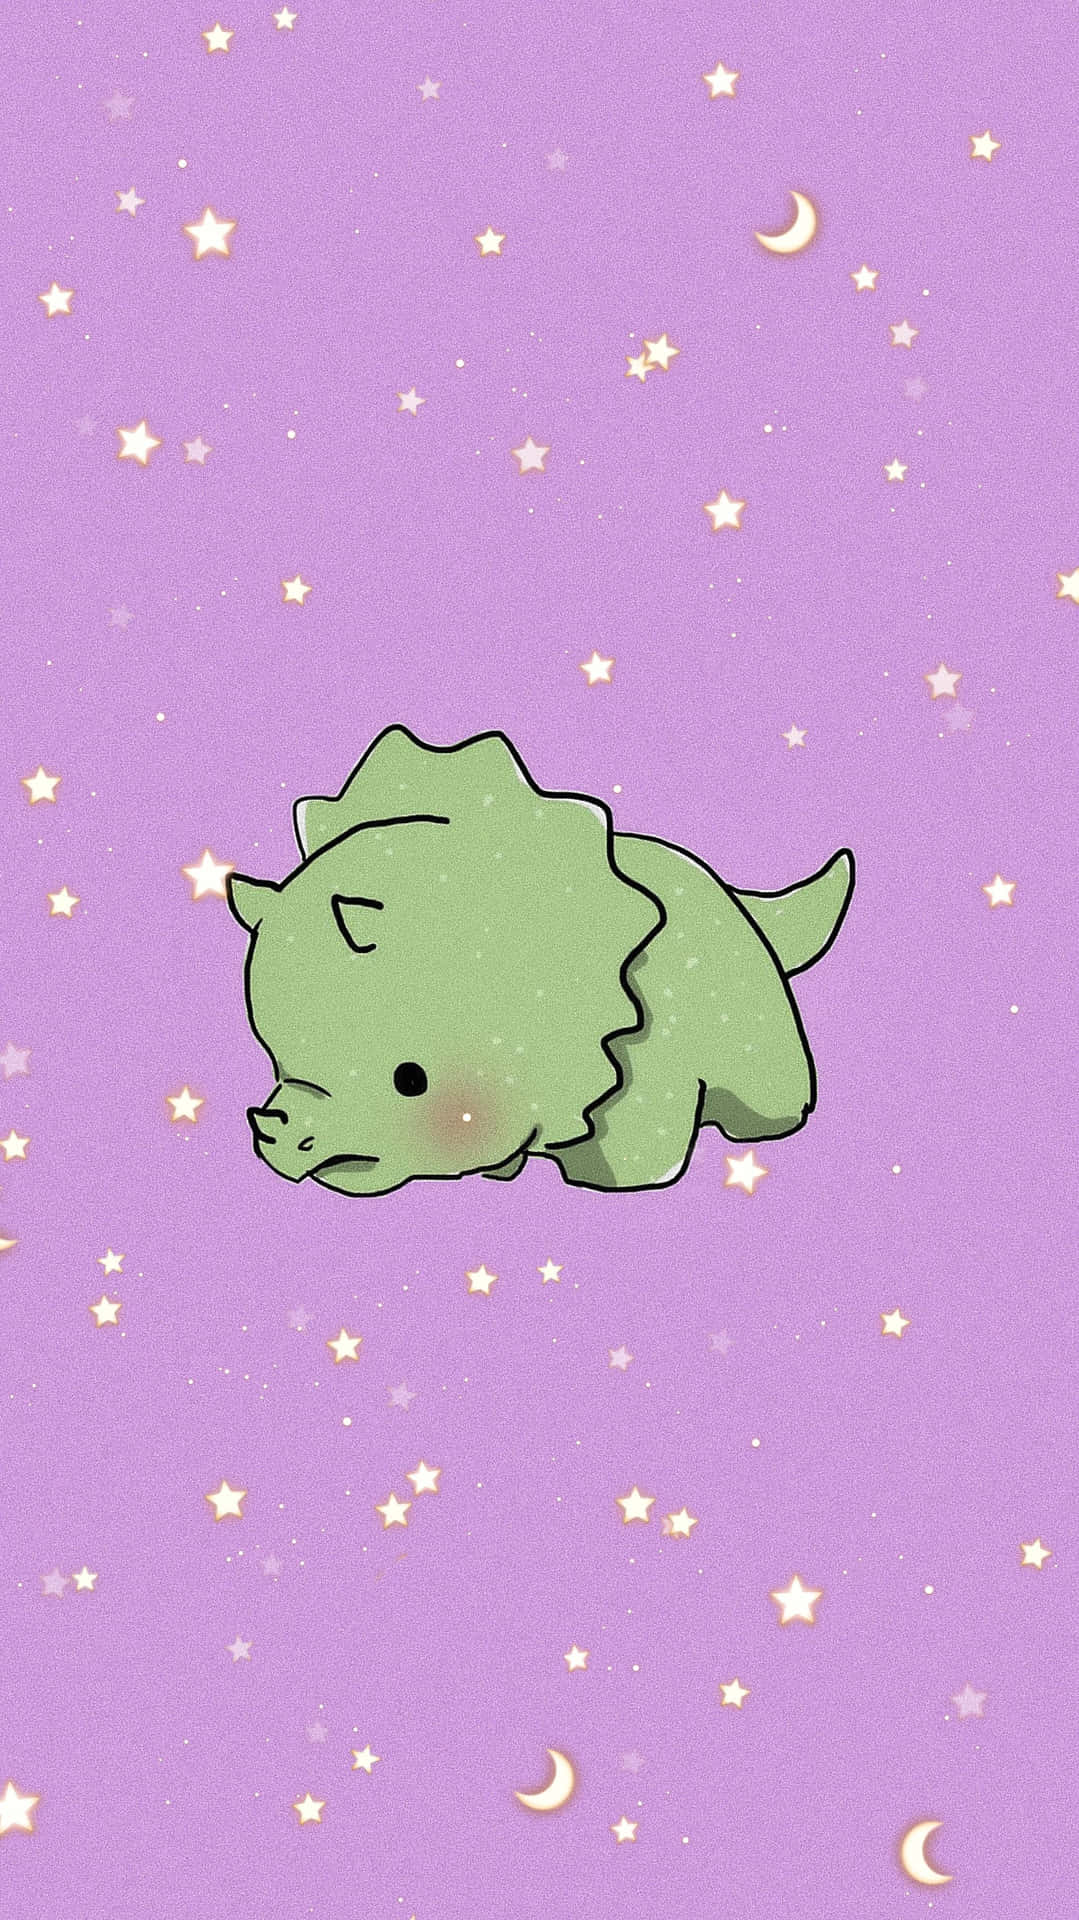 Adorable Dinosaur Characters On A Pastel Background